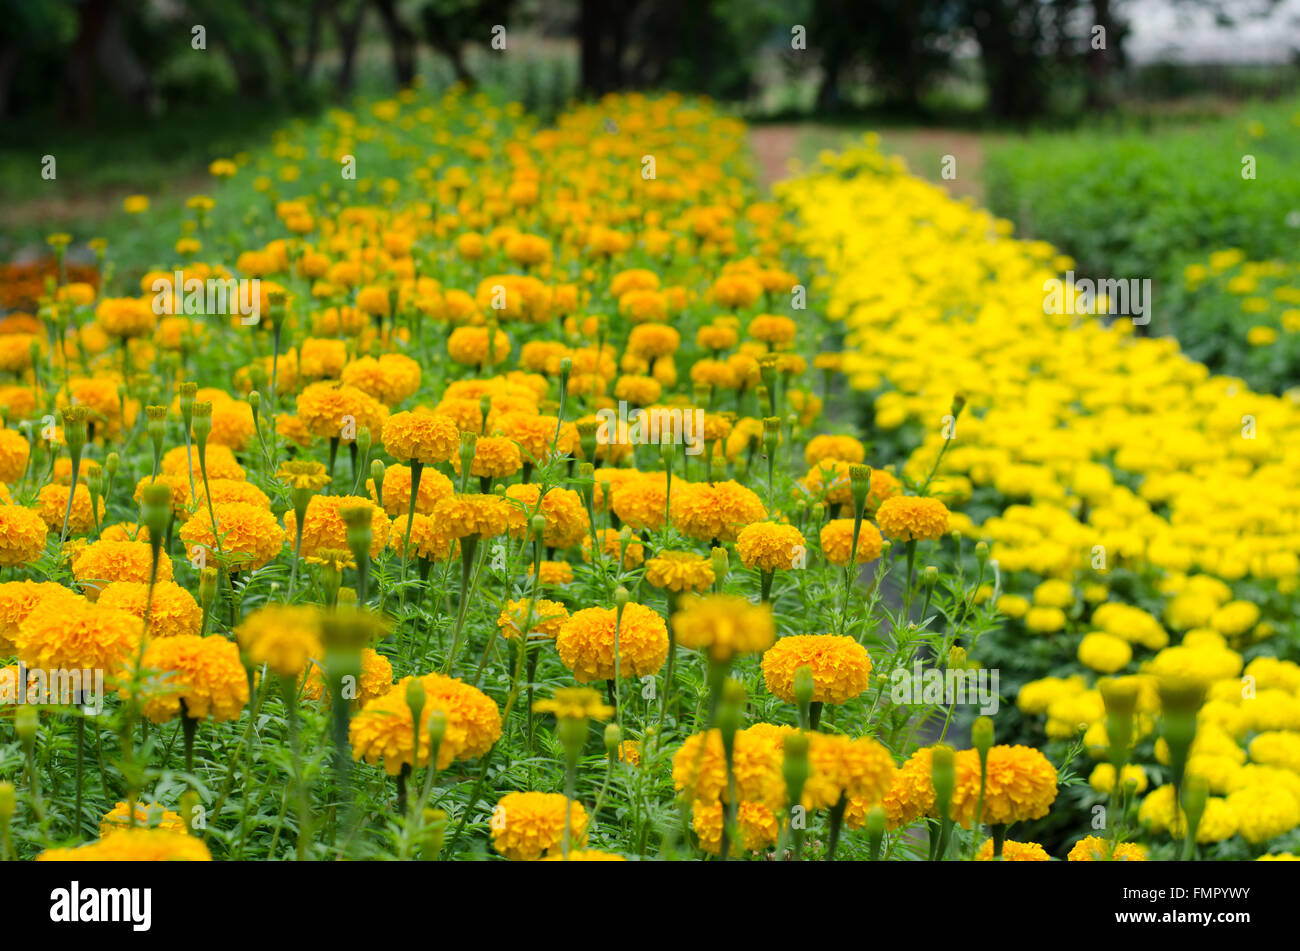 Yellow marigolds blooming in the garden Stock Photo